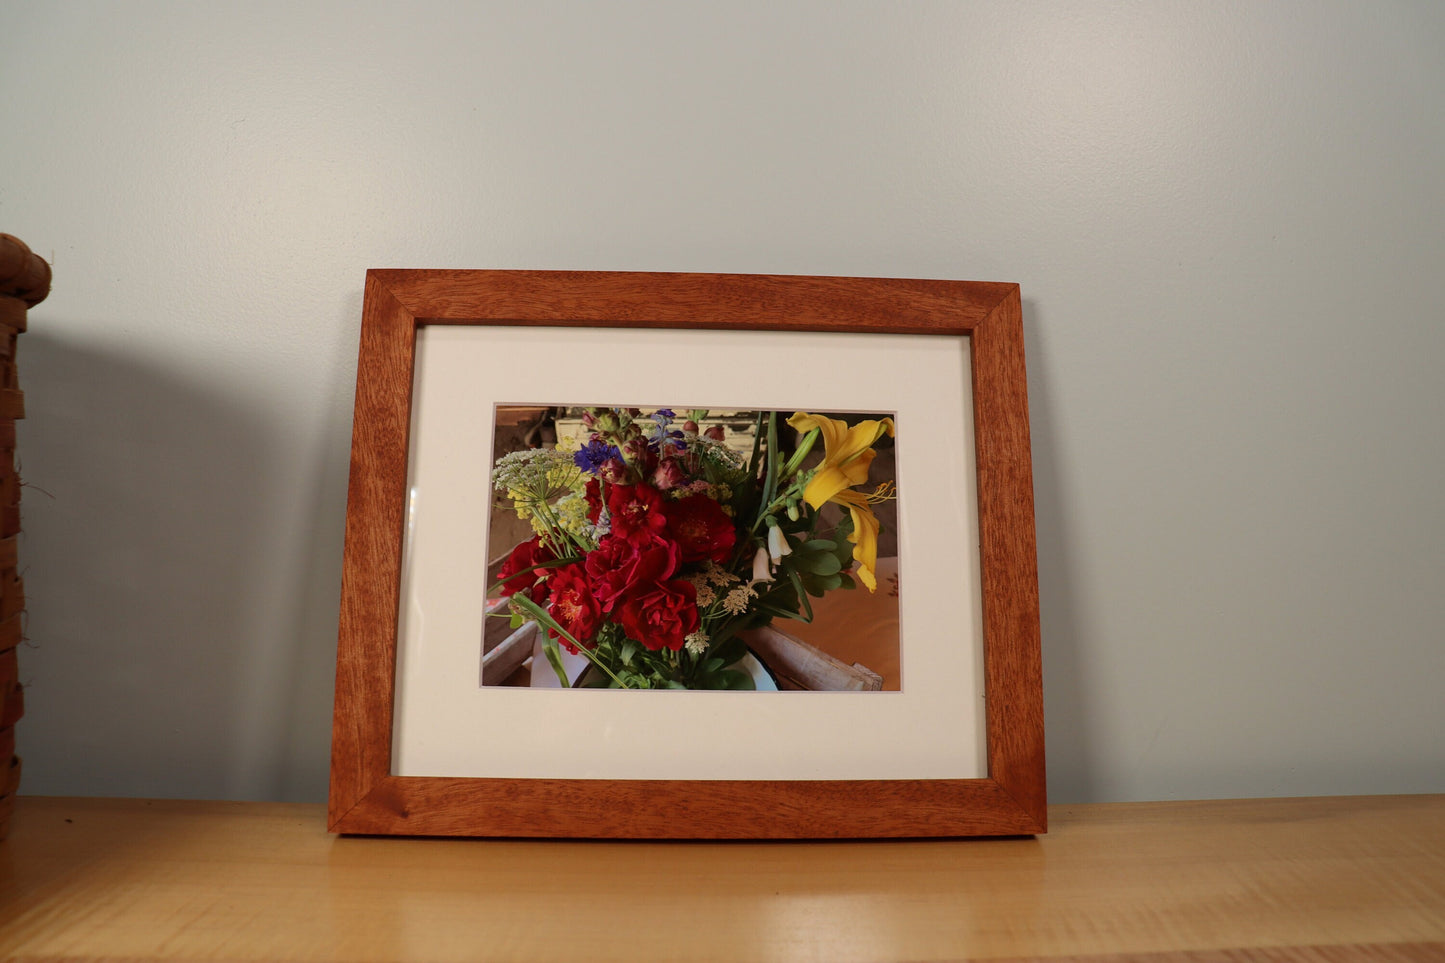 Mahogany Gallery Frame - Minimalist Profile - Picture Frame | Natural Wood Frame